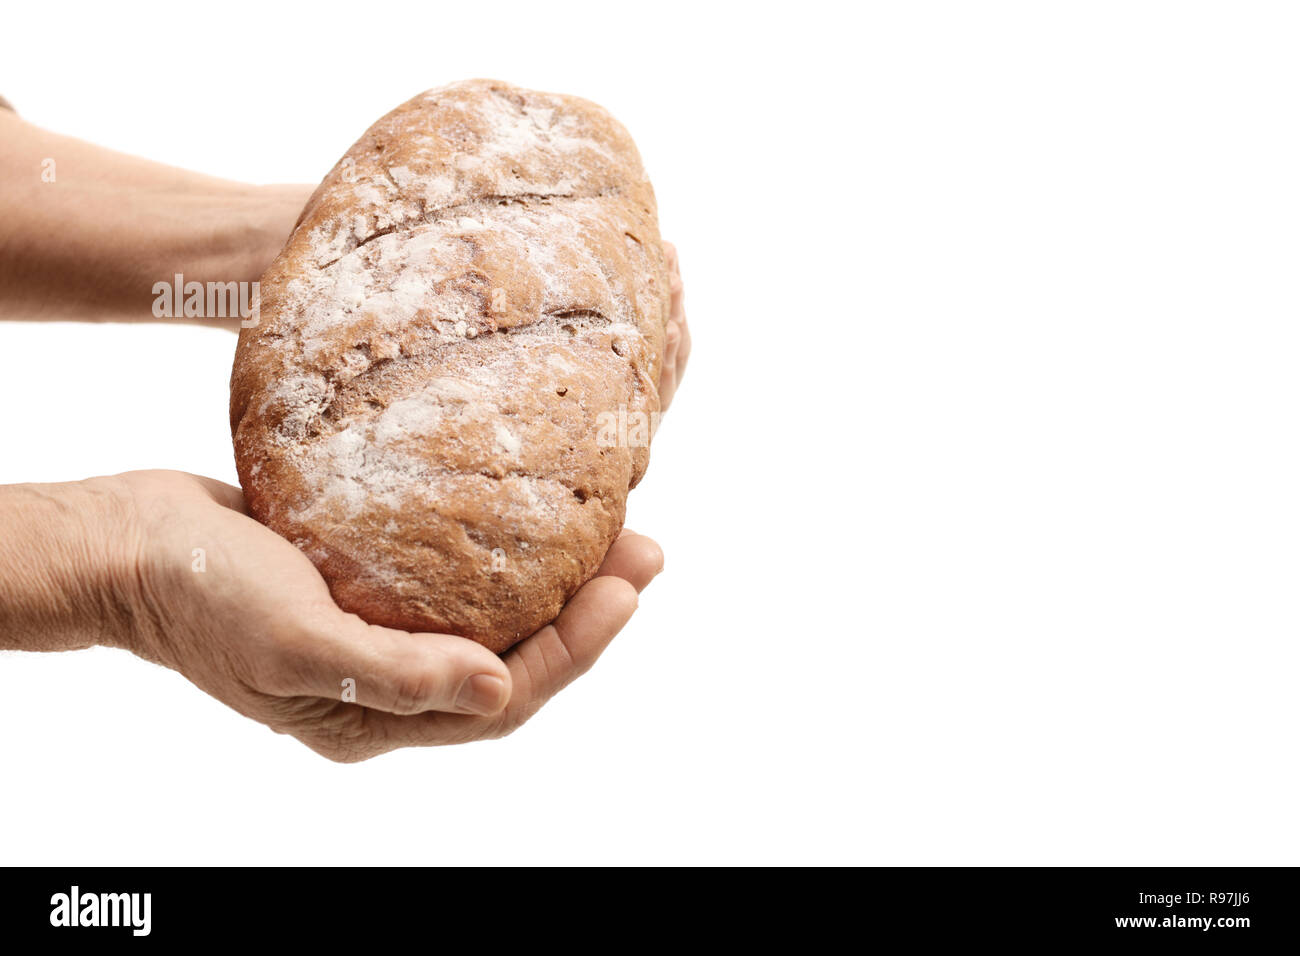 Hands of an elderly person holding a loaf of bread isolated on white background Stock Photo